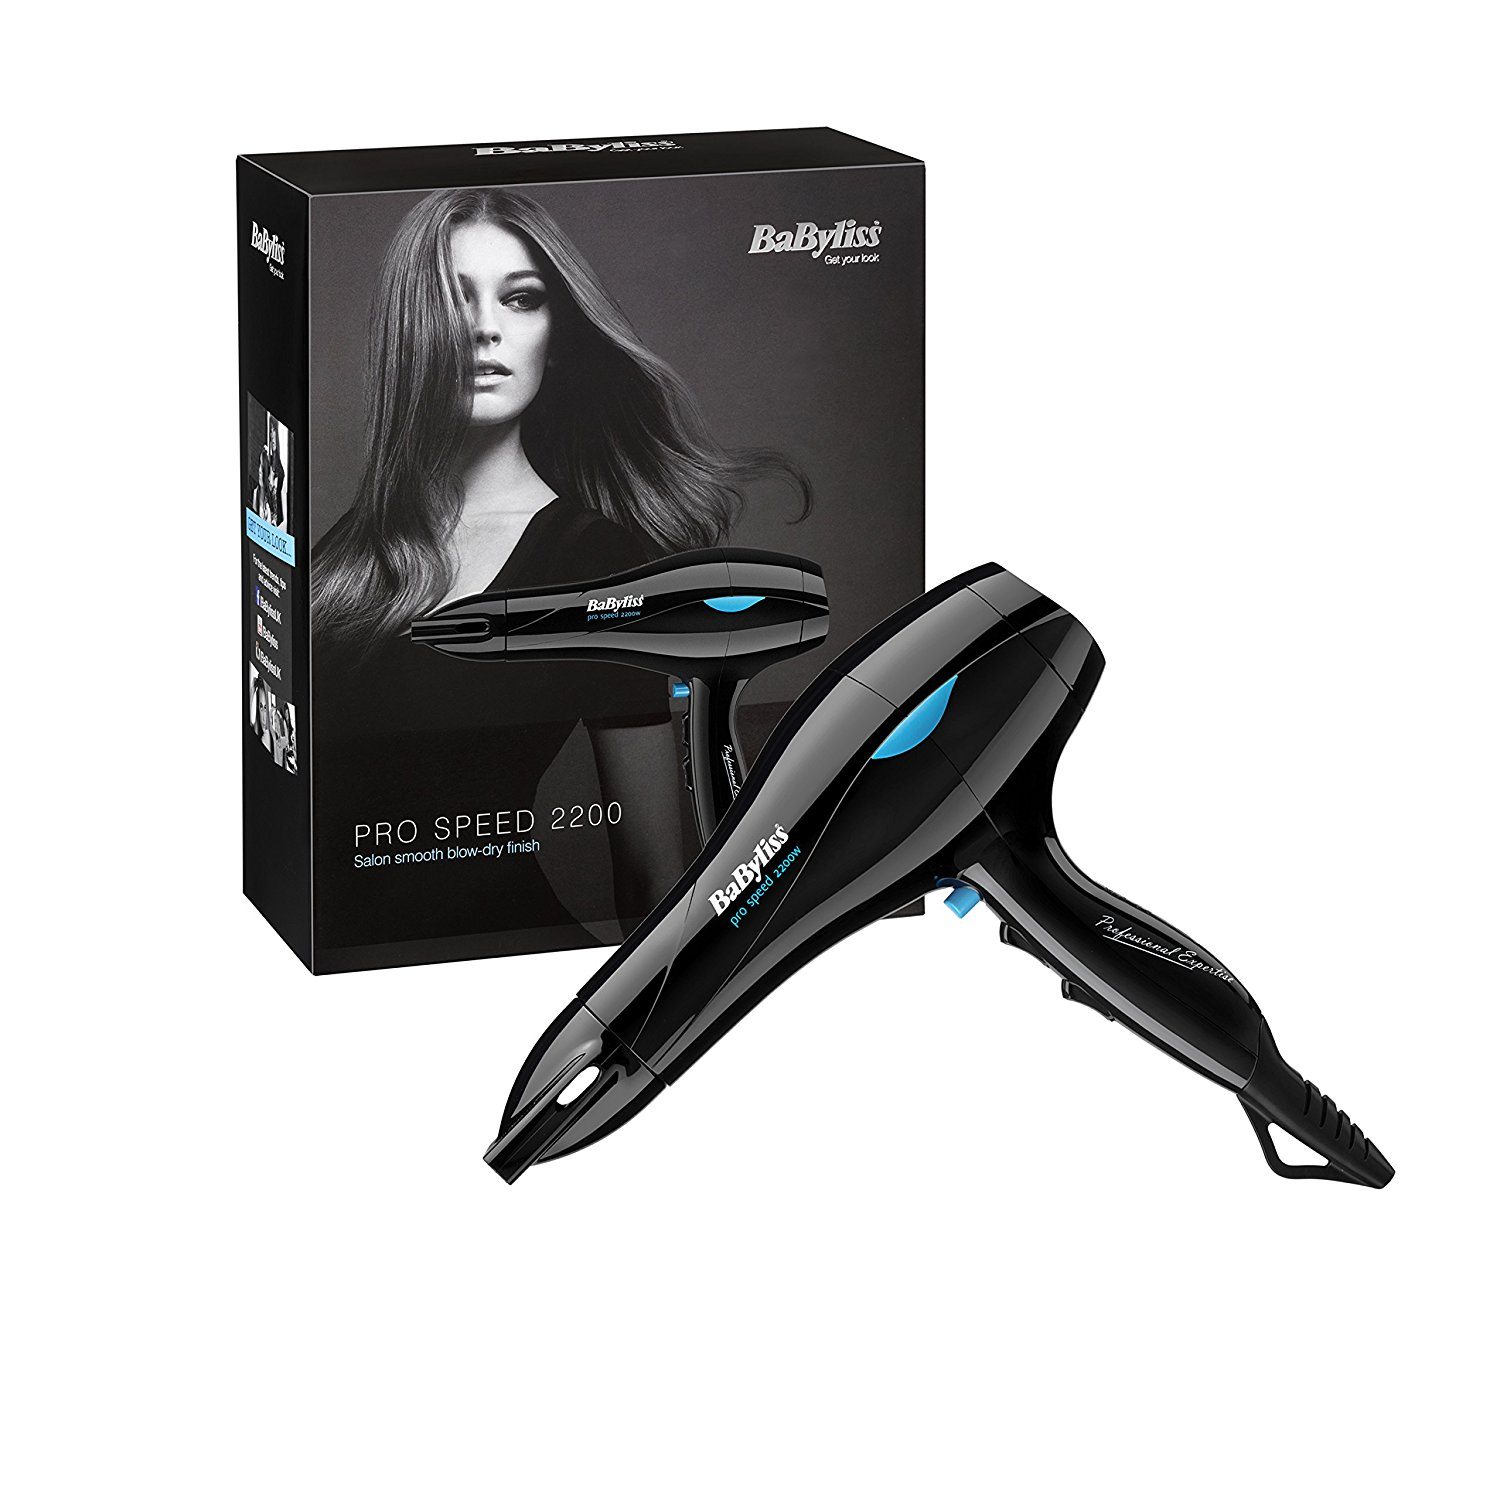 BaByliss Speed Pro 2200 Hair Dryer Review